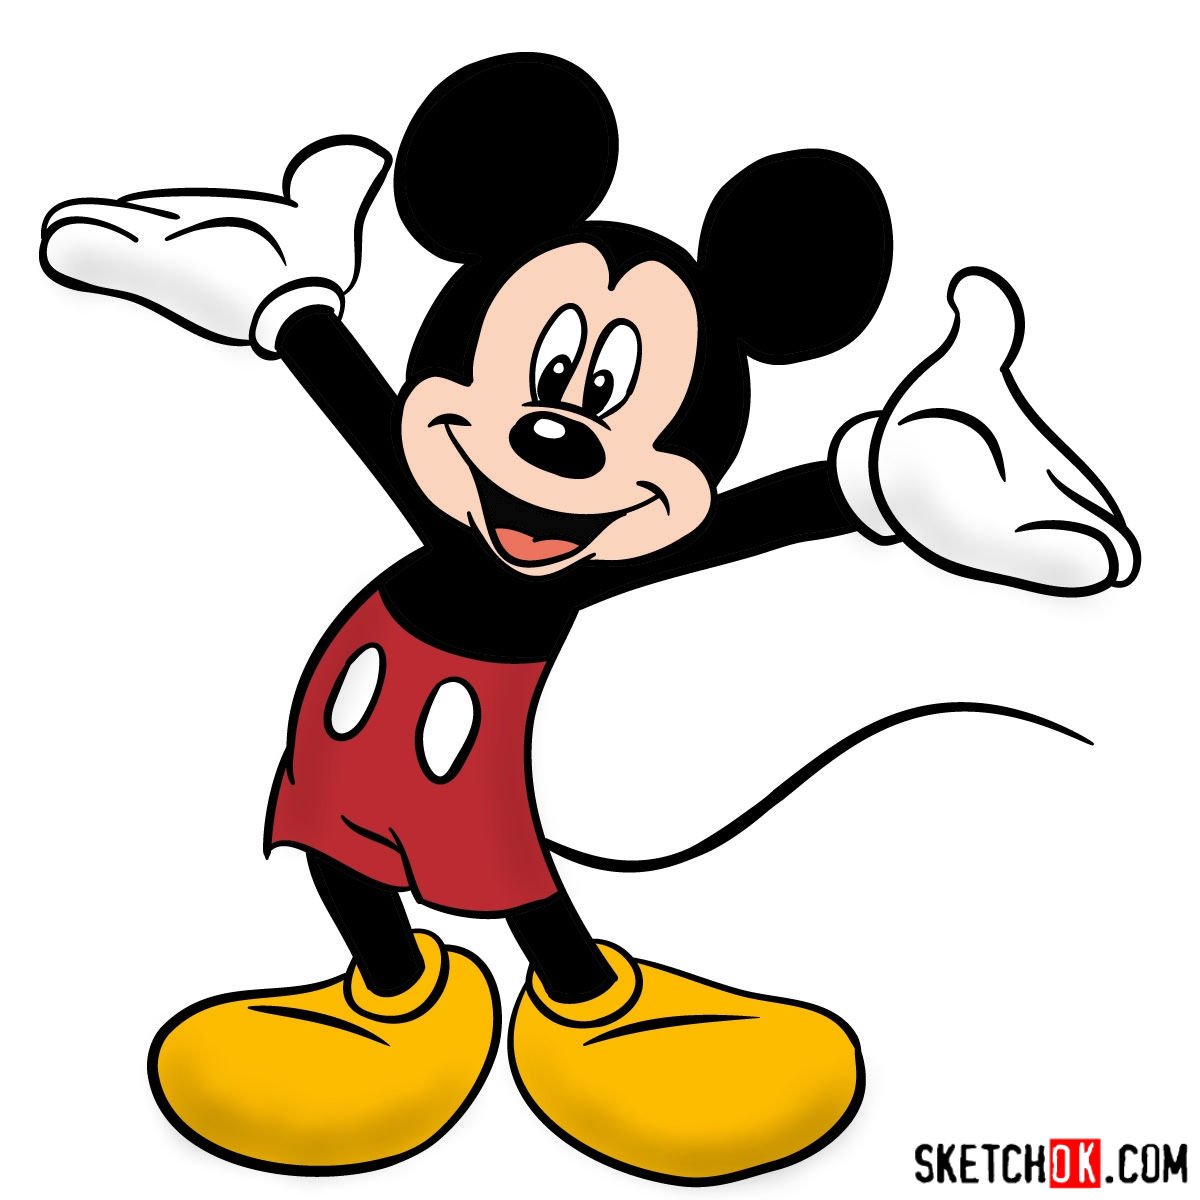 How To Draw Mickey Mouse | Step By Step Drawing Tutorials | Storiespub